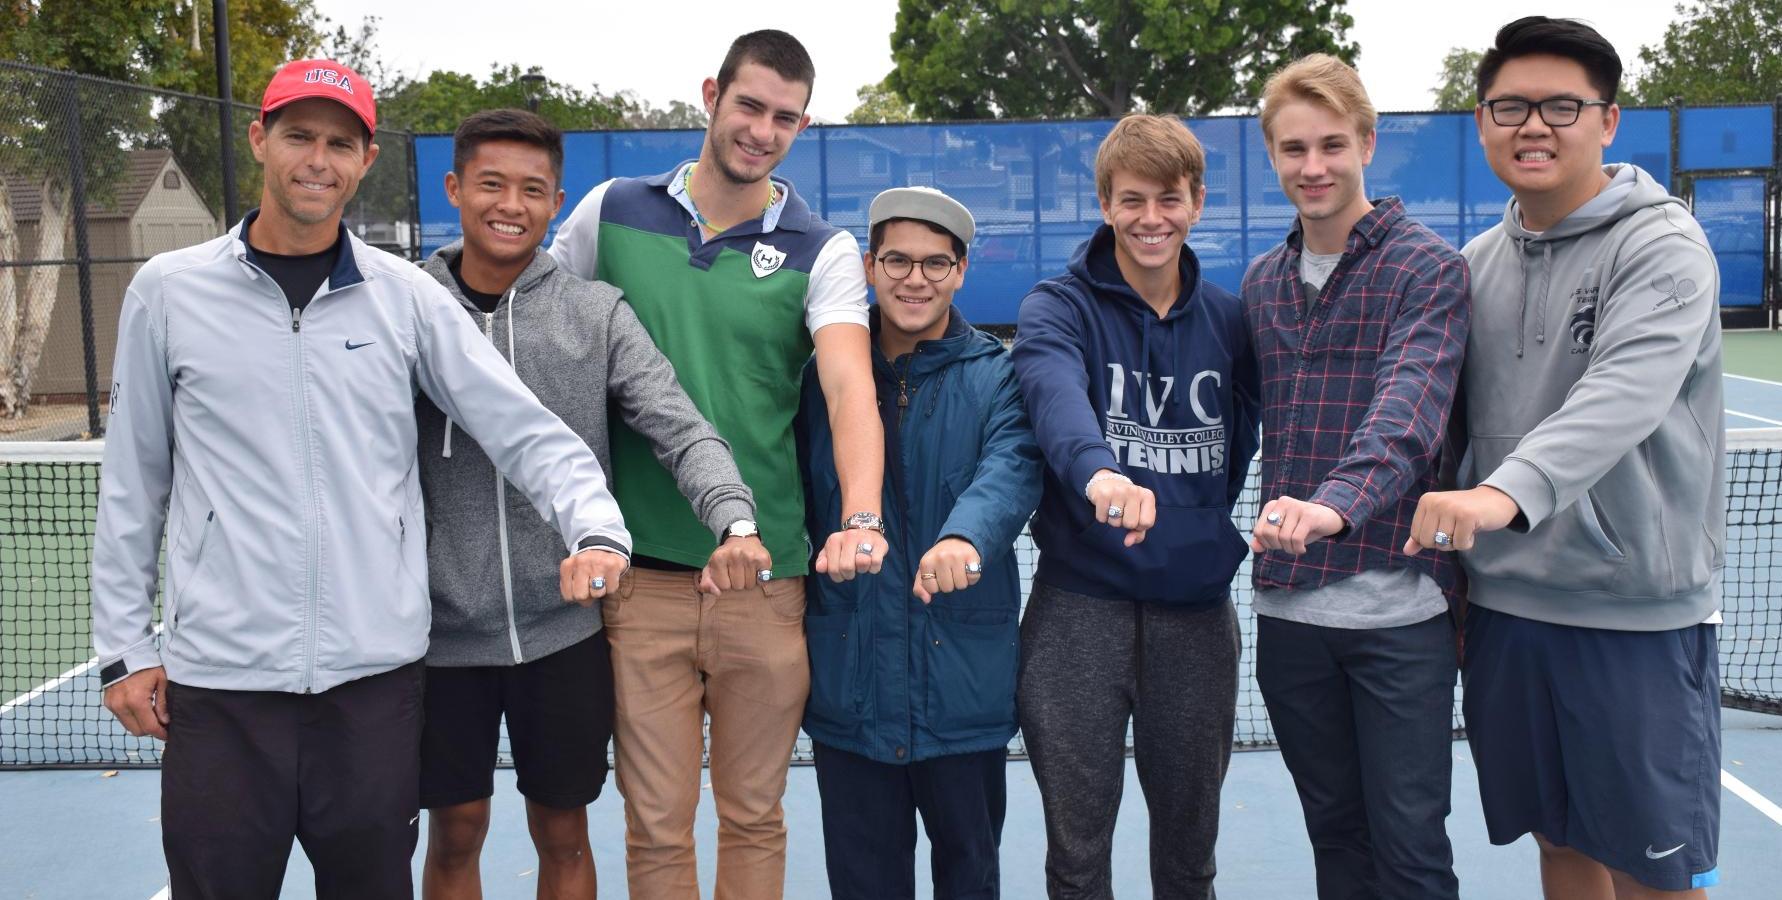 Men's tennis team celebrates 2015 state title with rings